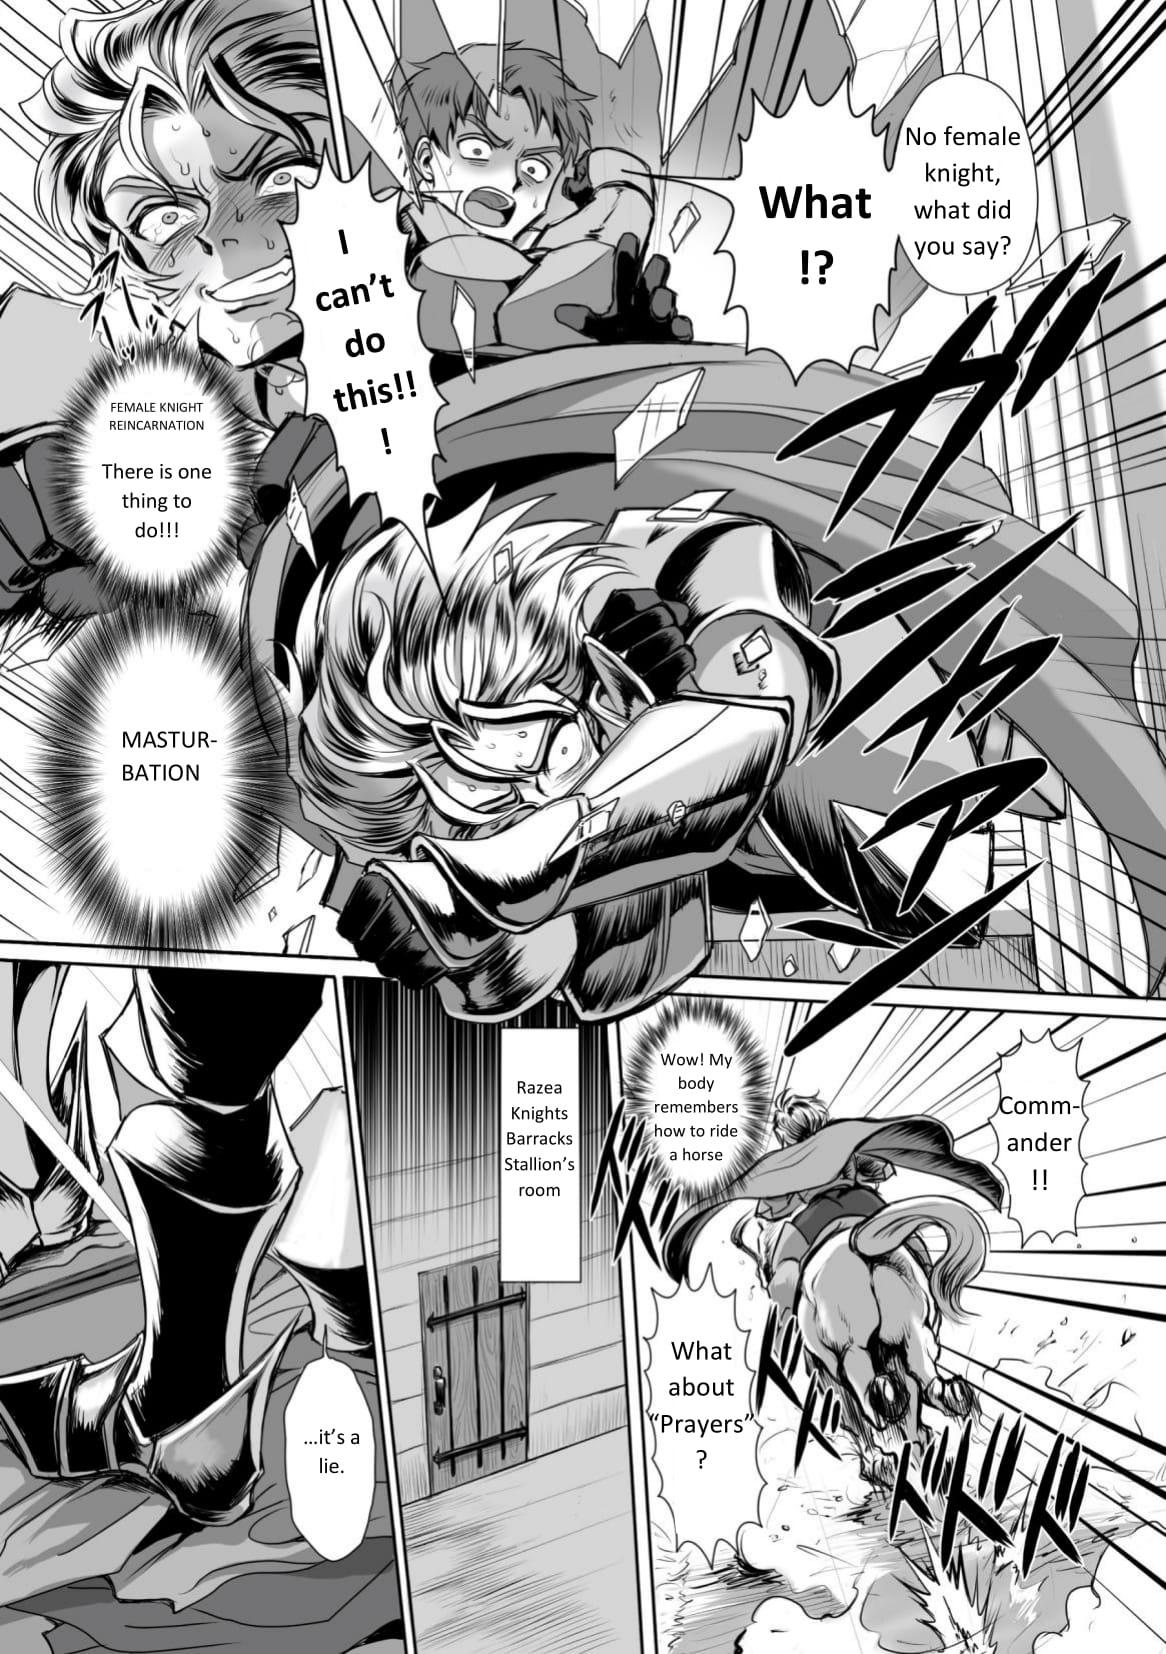 Rubia [Usuno Taro] Possessed Knight Stallion-Taken Over By Disgusting Man Raped and Climaxes Unsightly - English Public Nudity - Page 7